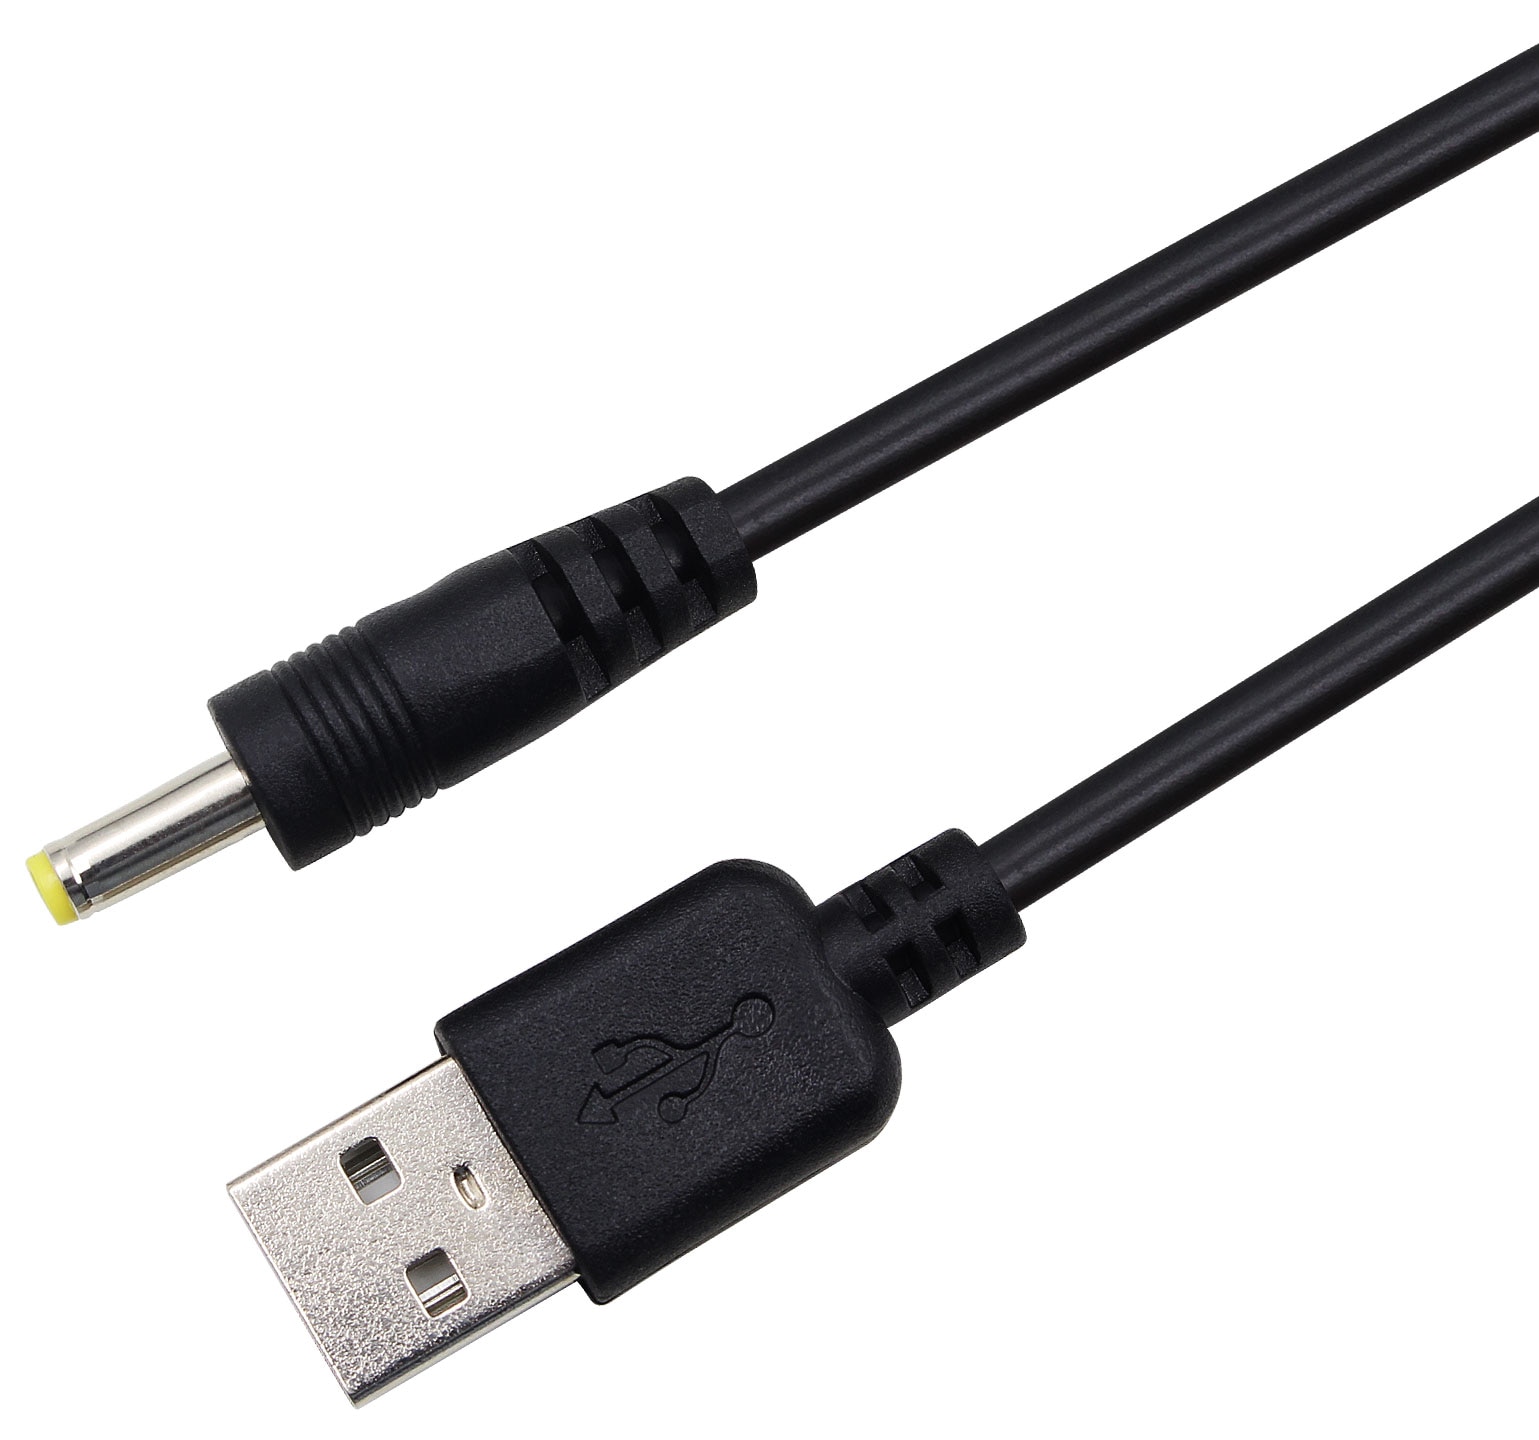 Usb Power Charger Cable Koord Voor Sony Srs-m30 SRSXB30 SRS-XB30 Bluetooth Speaker